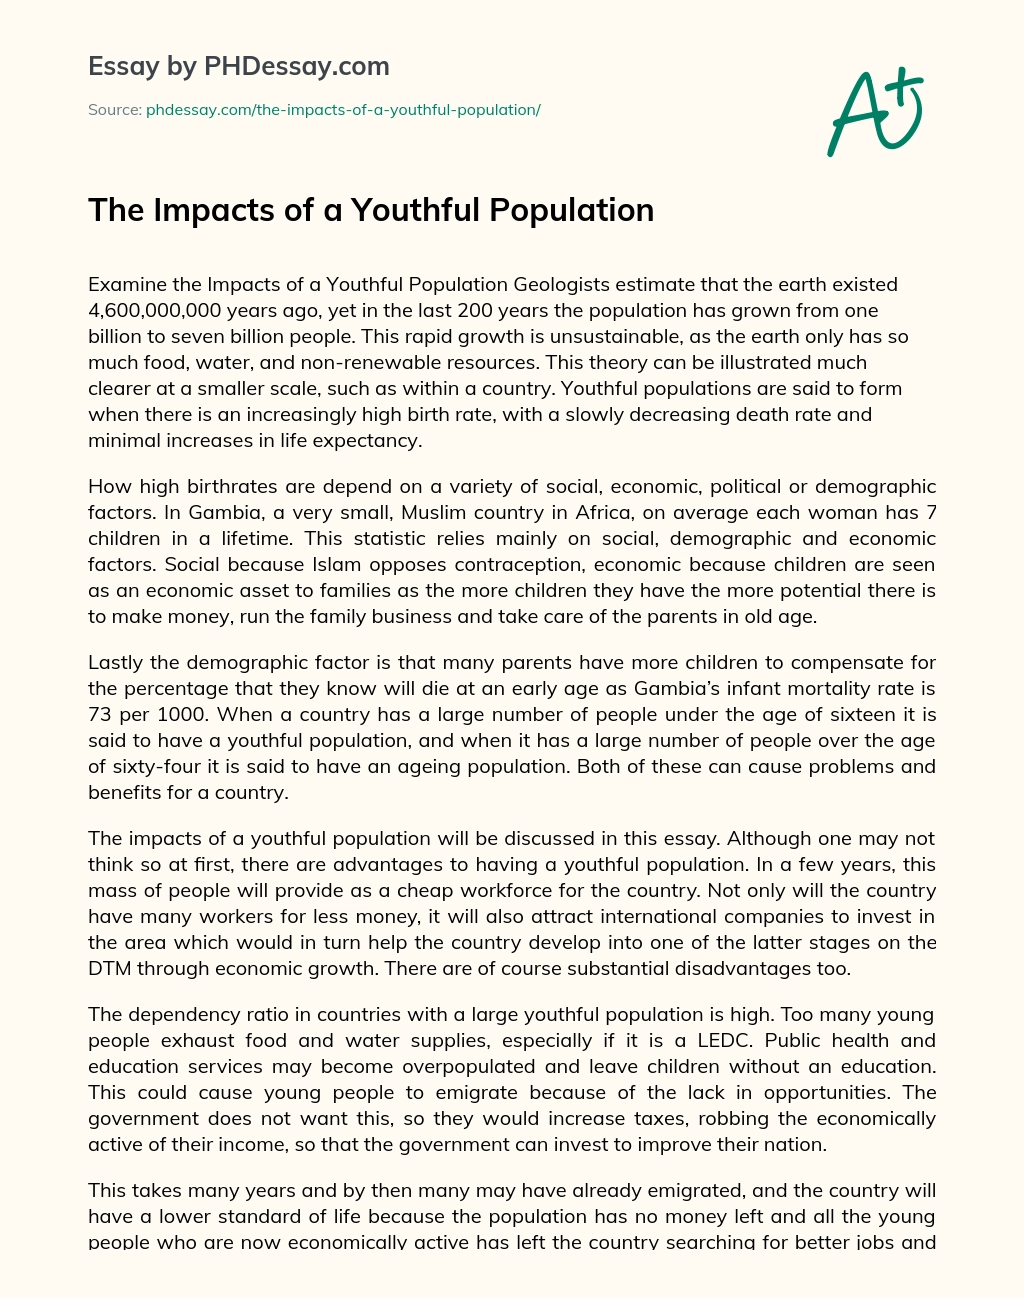 The Impacts of a Youthful Population essay